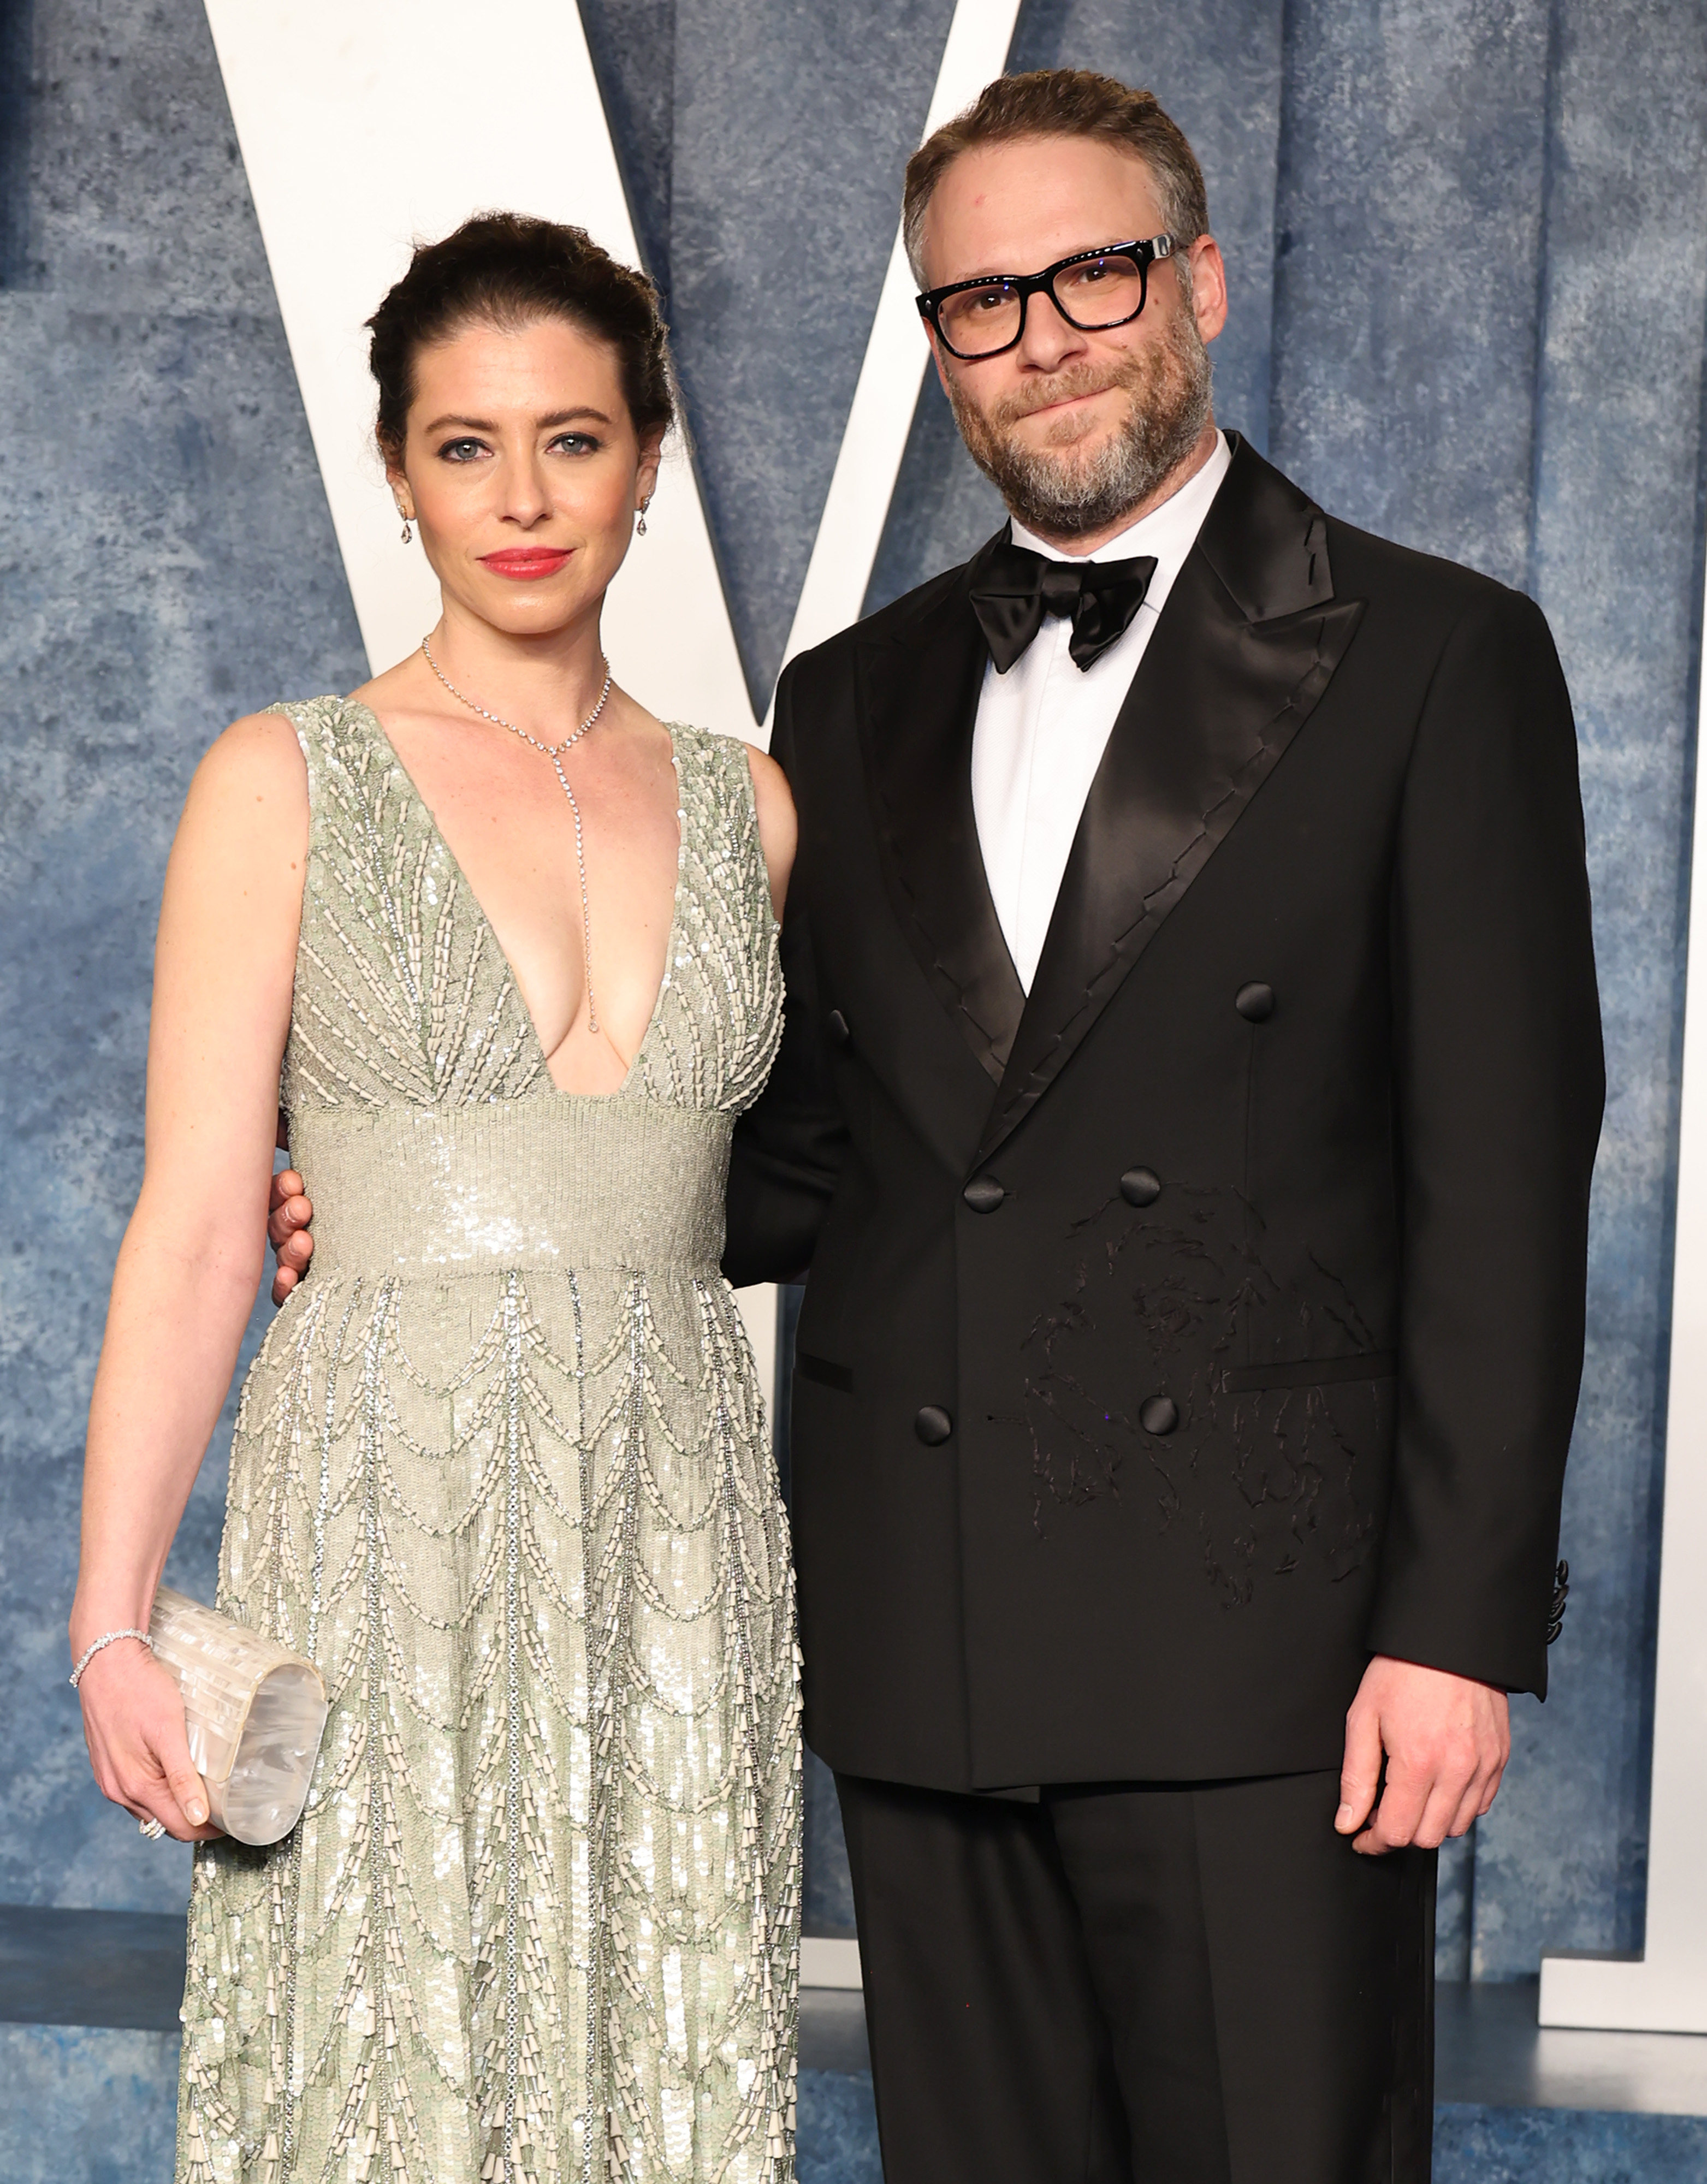 Hollywood comedy couple Seth Rogen and Lauren Miller Rogen founded Hilarity for Charity to make life easier for Alzheimer’s patients and their carers and raise awareness of the disease. Photo: Getty Images